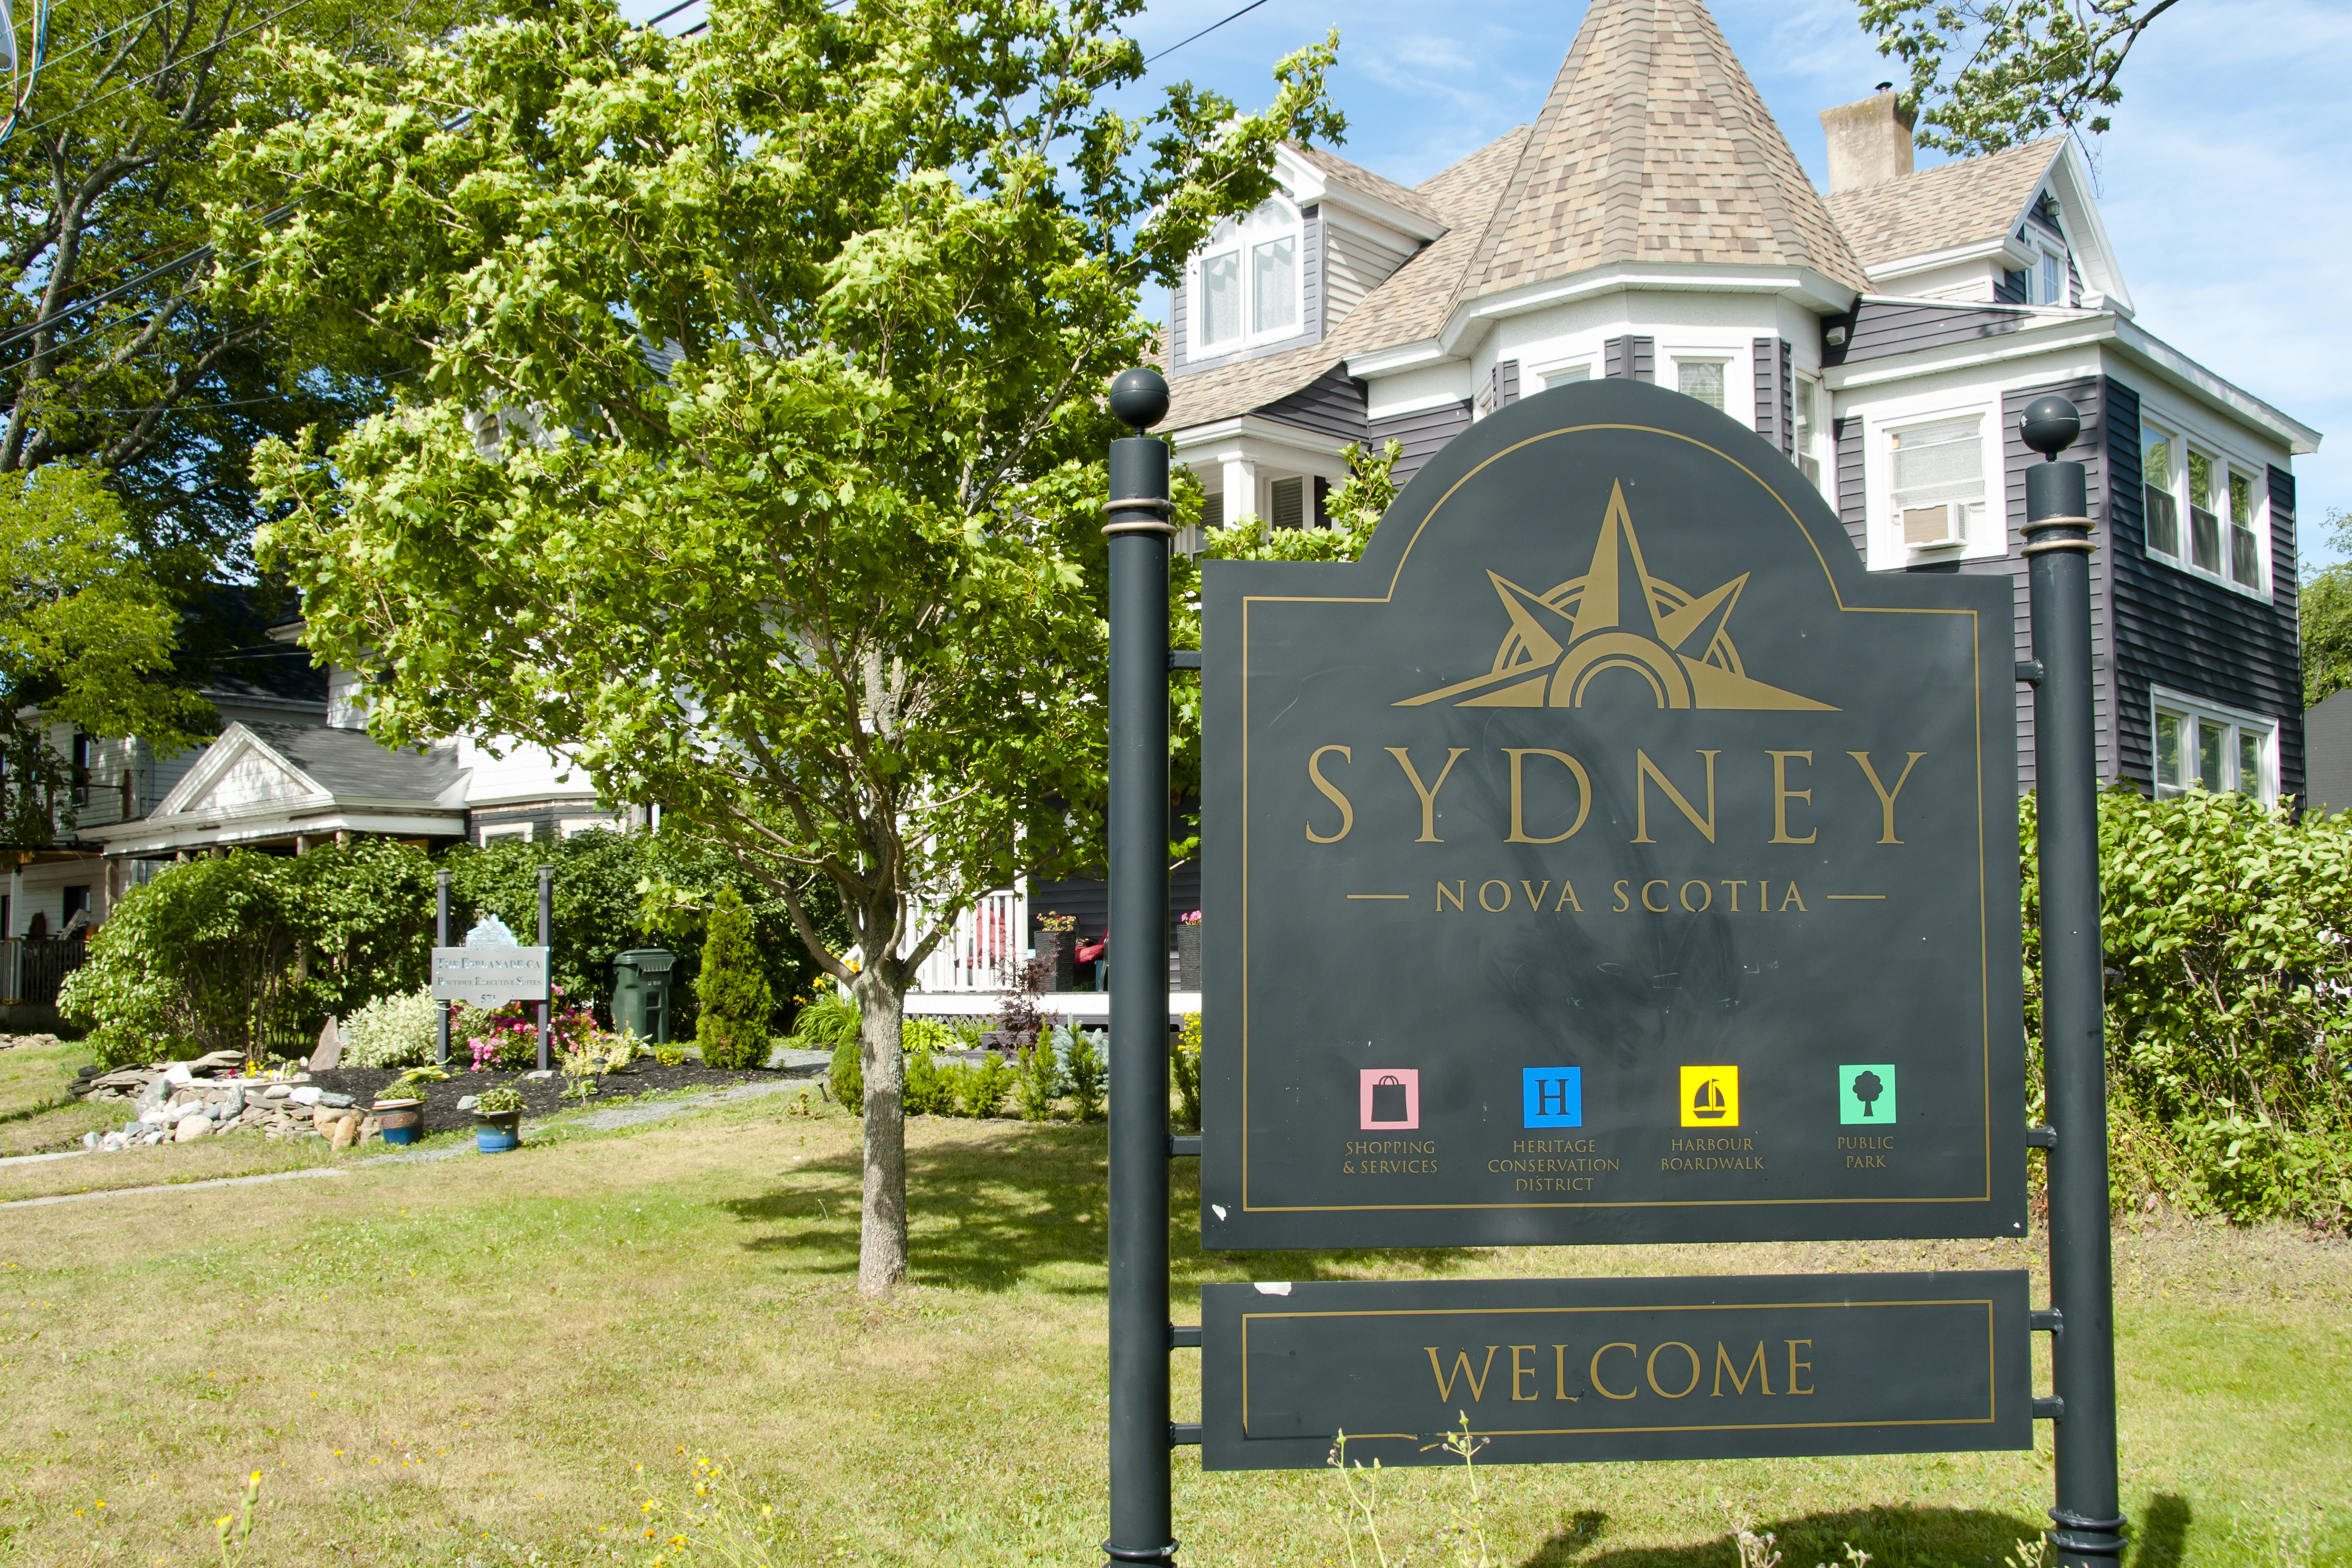 Sign in front of house that says "Sydney, Nova Scotia. Welcome. Shopping & Services; Heritage Conservation District; Harbour Boardwalk; Public Park."